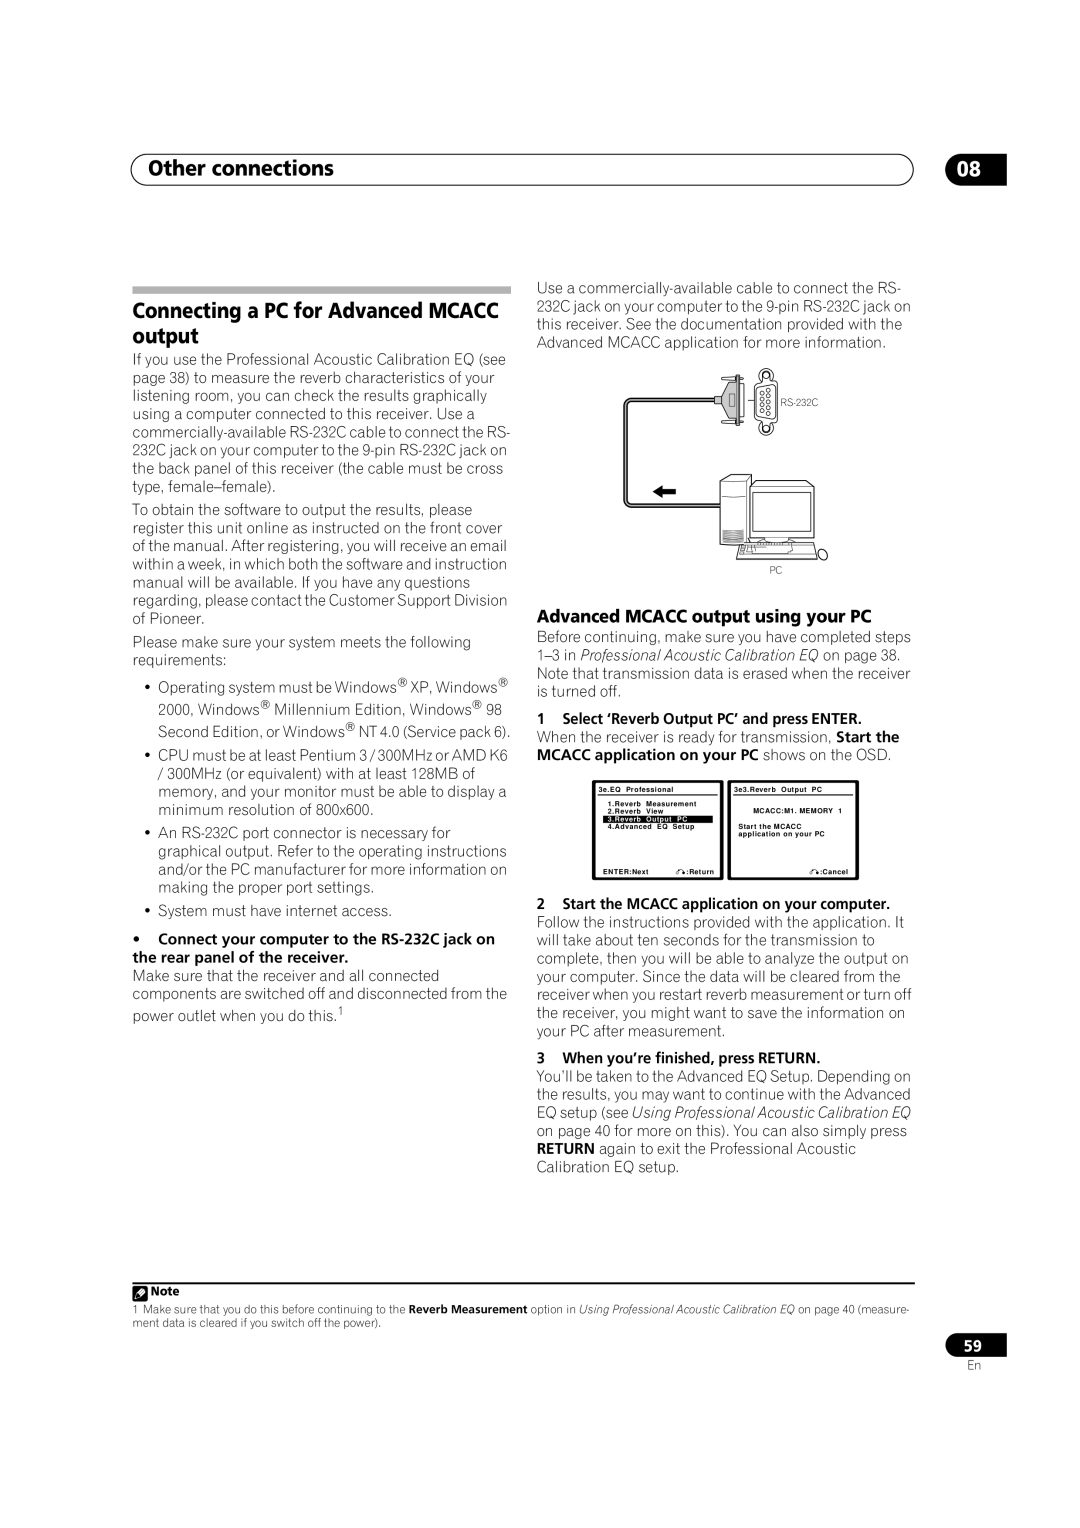 Pioneer VSX-AX4AVi-G Connecting a PC for Advanced MCACC output, Advanced MCACC output using your PC, Other connections 